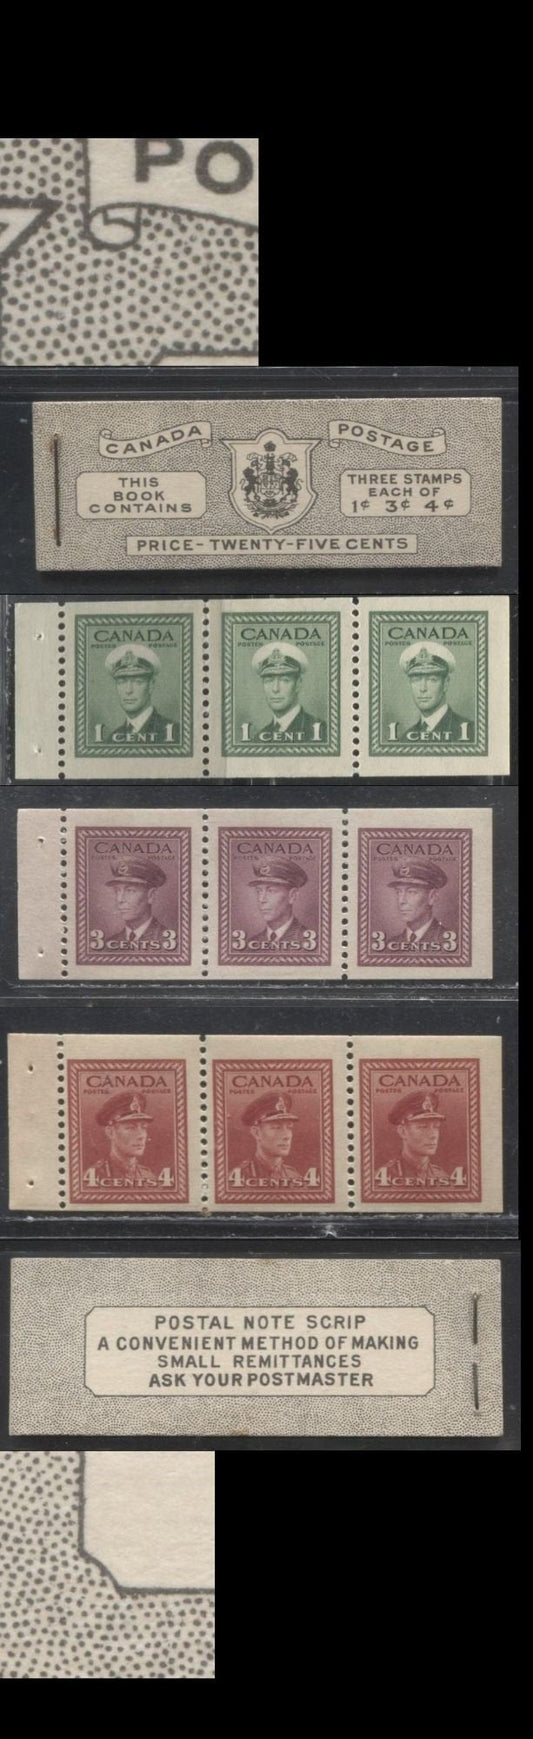 Lot 96 Canada #BK38a 1942-1949 War Issue Complete 25c, English Booklet Containing 1 Pane Each of 3 of 1c Green, 3c Rosy Plum and 4c Carmine Red, Vertical Wove Paper, Harris Front Cover Type IVa , Back Cover Haii, 7c & 6c Rate Page